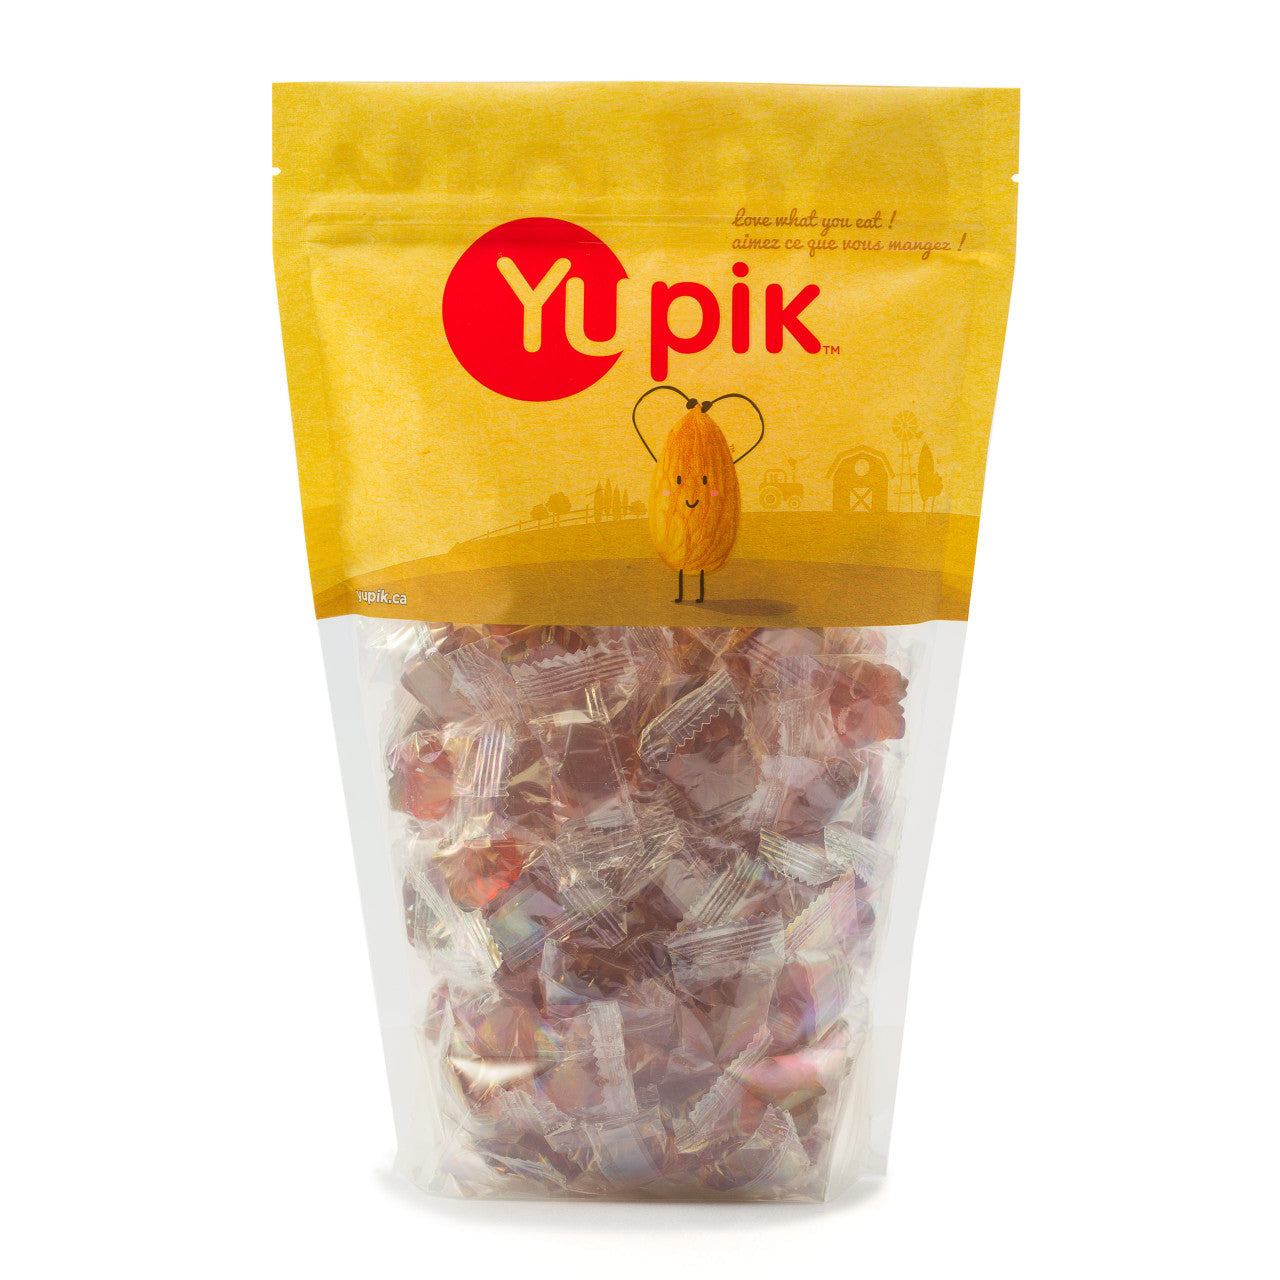 Yupik Pure Maple Leaf Syrup Candies, 1Kg/2.2 lbs., {Imported from Canada}